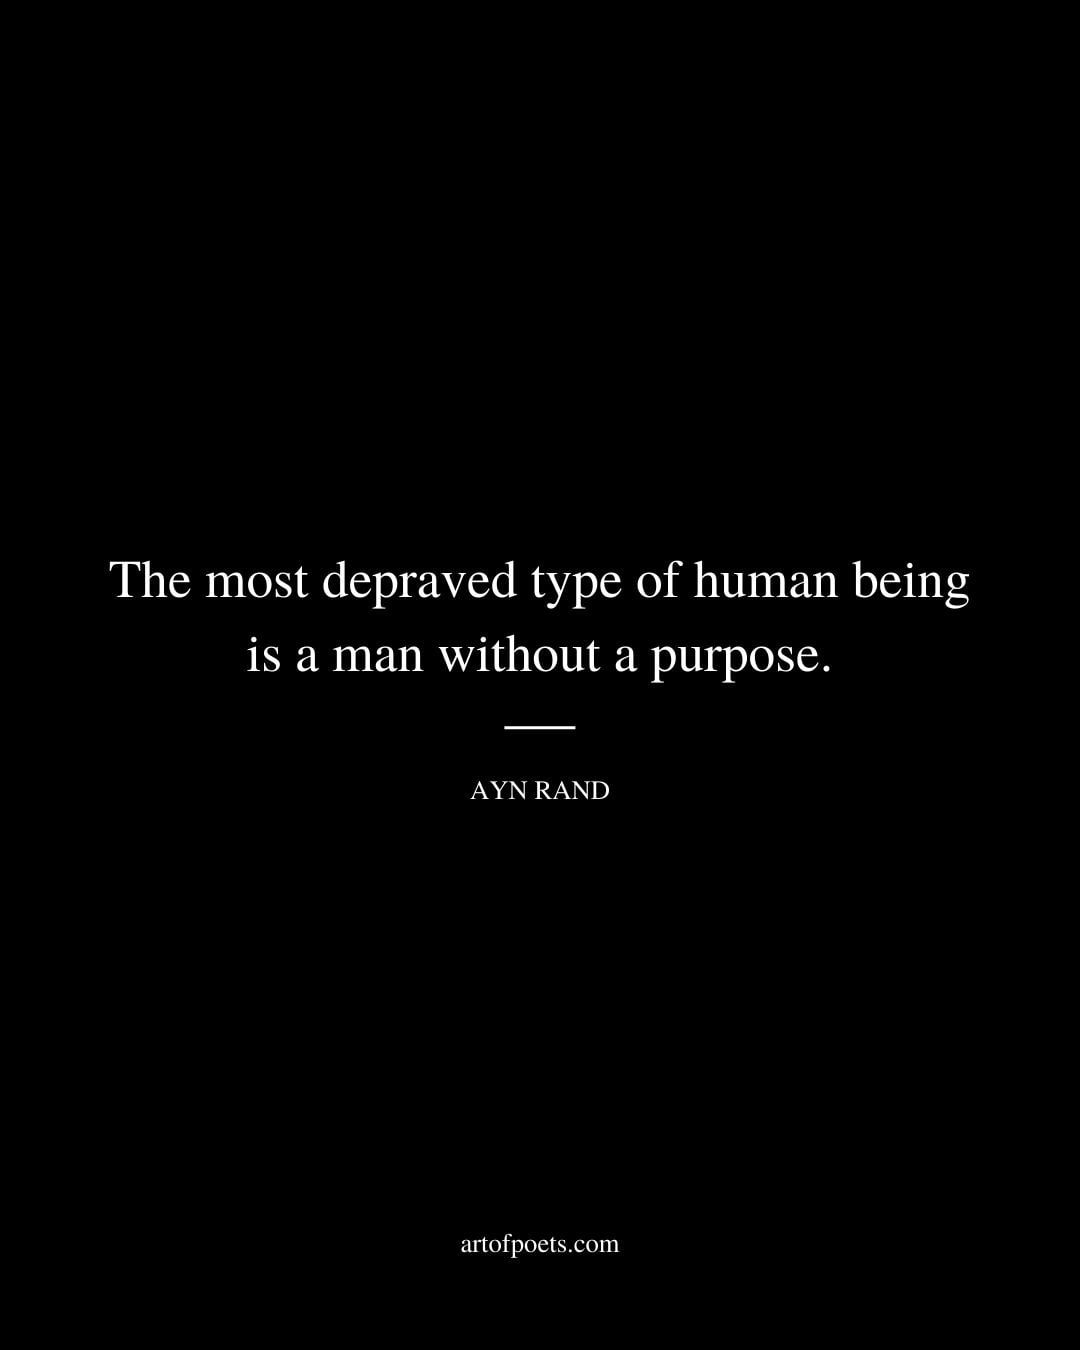 The most depraved type of human being is a man without a purpose